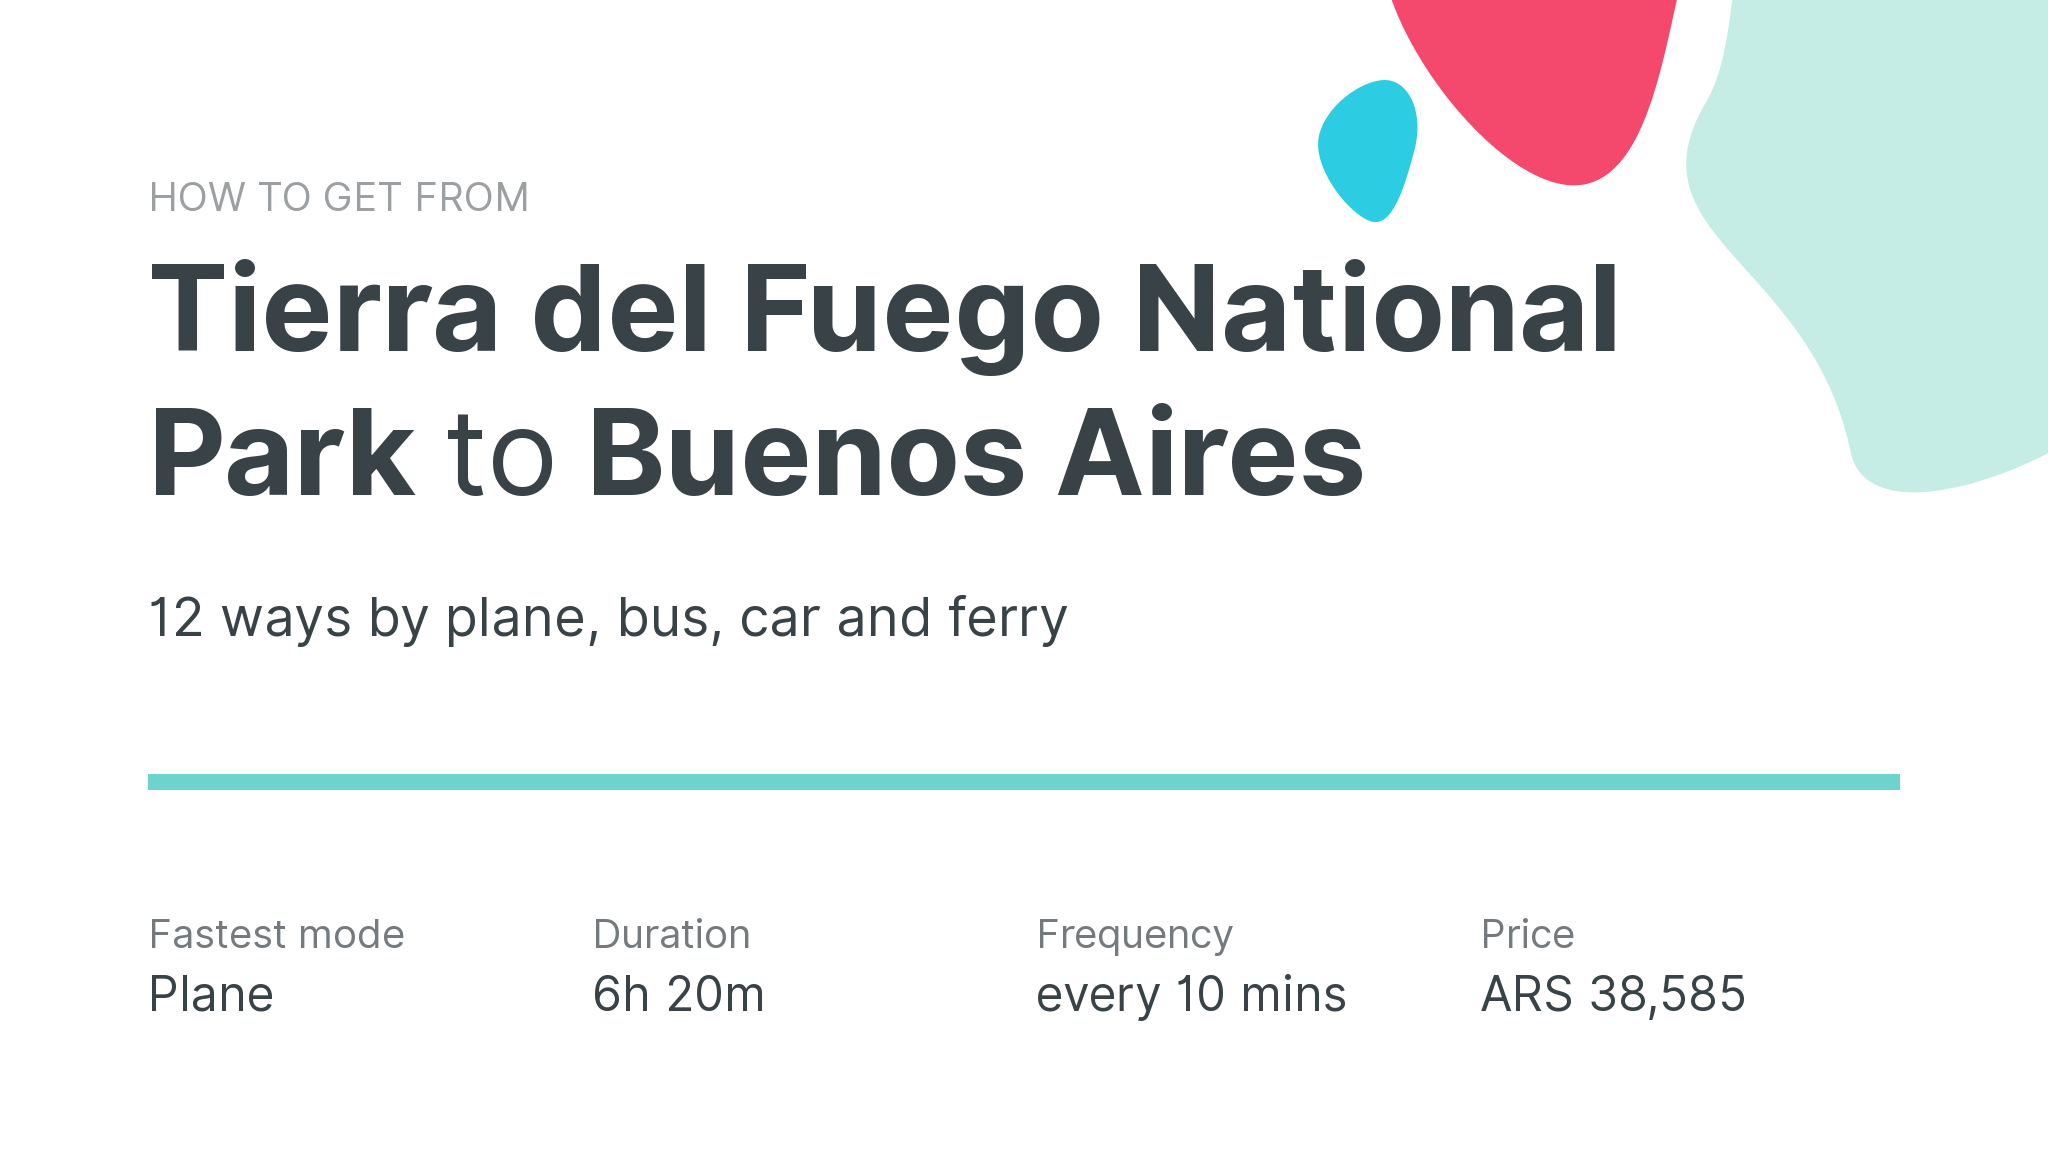 How do I get from Tierra del Fuego National Park to Buenos Aires